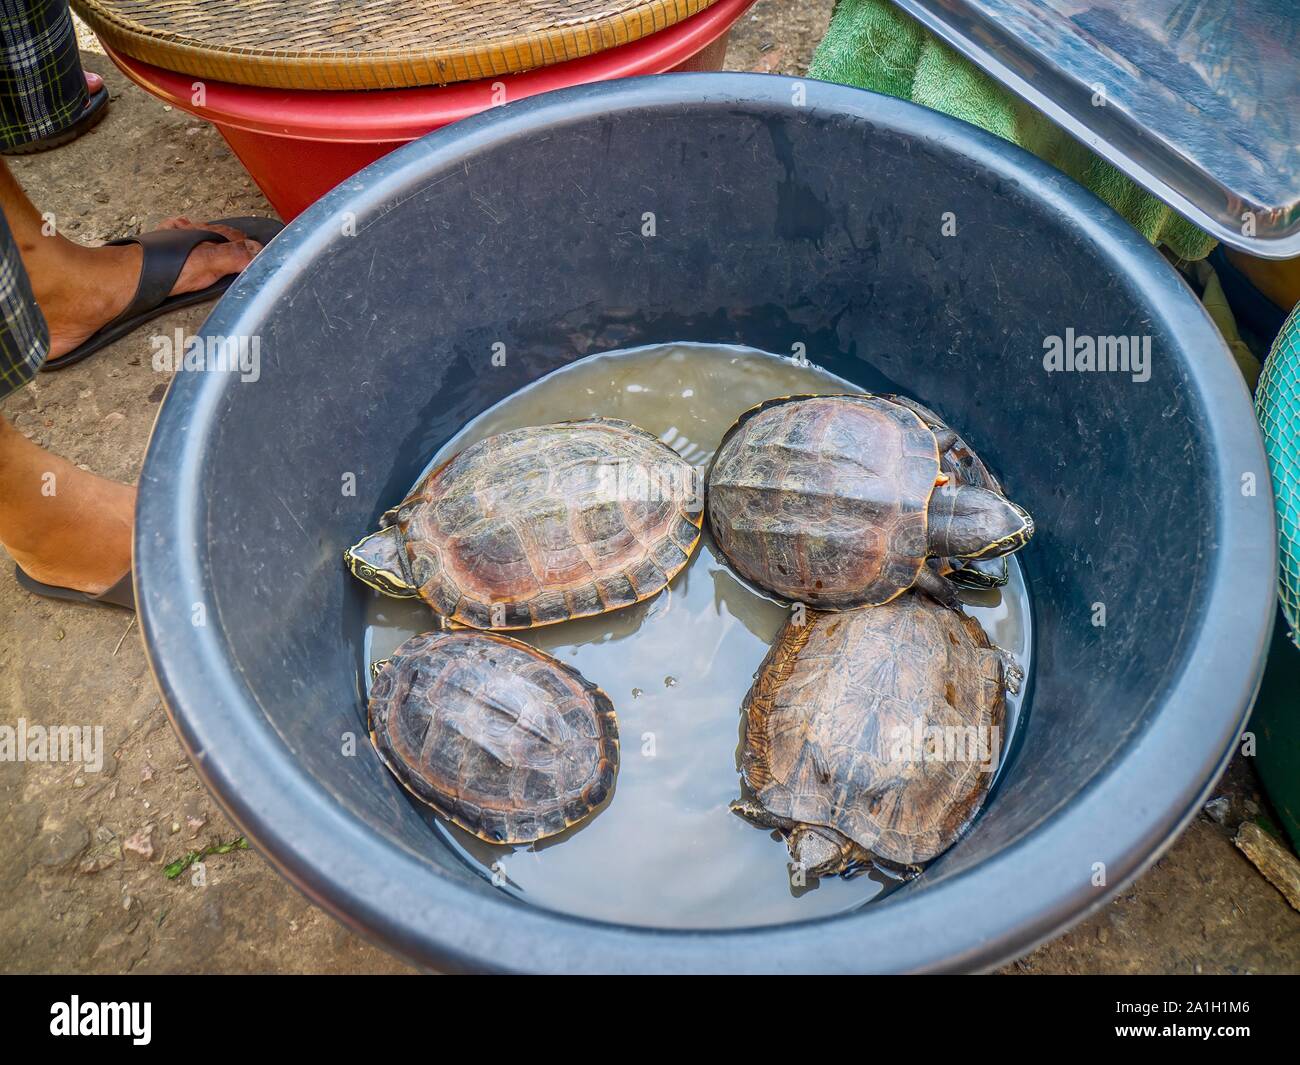 Live, wild freshwater turtles for sale as meat at an outdoor Cambodian tood market. Stock Photo